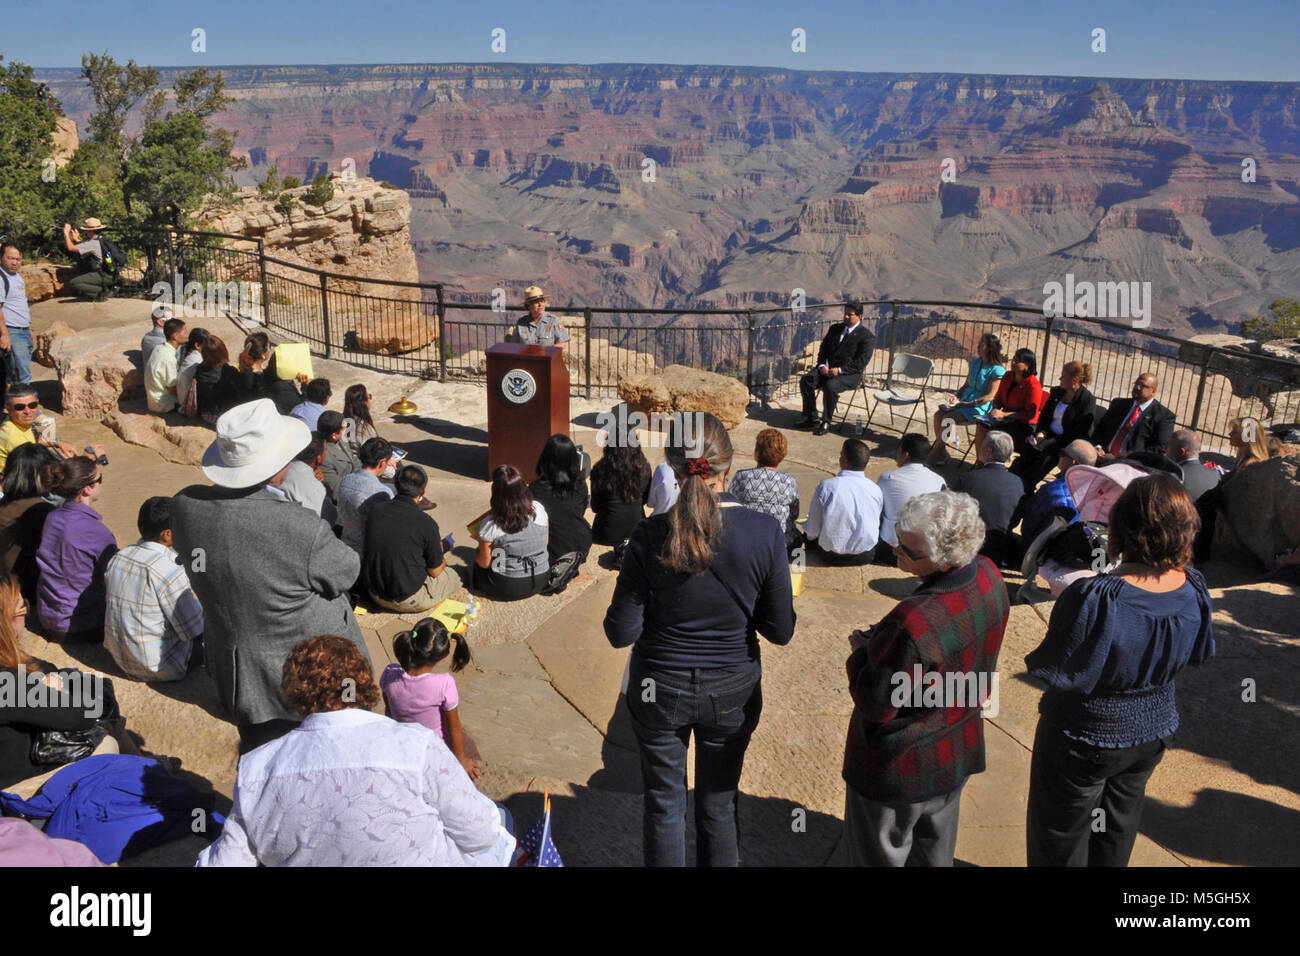 Naturalization Ceremony Grand Canyon mq  On Thursday, September 23, Grand Canyon National Park in coordination with The Department of Homeland Security, hosted a naturalization ceremony at the Mather Amphitheatre on the South Rim. This is the first time in history that Grand Canyon National Park has hosted such an event.   Under blue skies and before a breathtaking view, 23 individuals from 12 different countries including, Colombia, Dominican Republic, Guatemala, Japan, Mexico, Morocco, Australia, Trinidad and Tobago, Uruguay, Venezuela, Vietnam and Zambia, became naturalized citizens. Many f Stock Photo